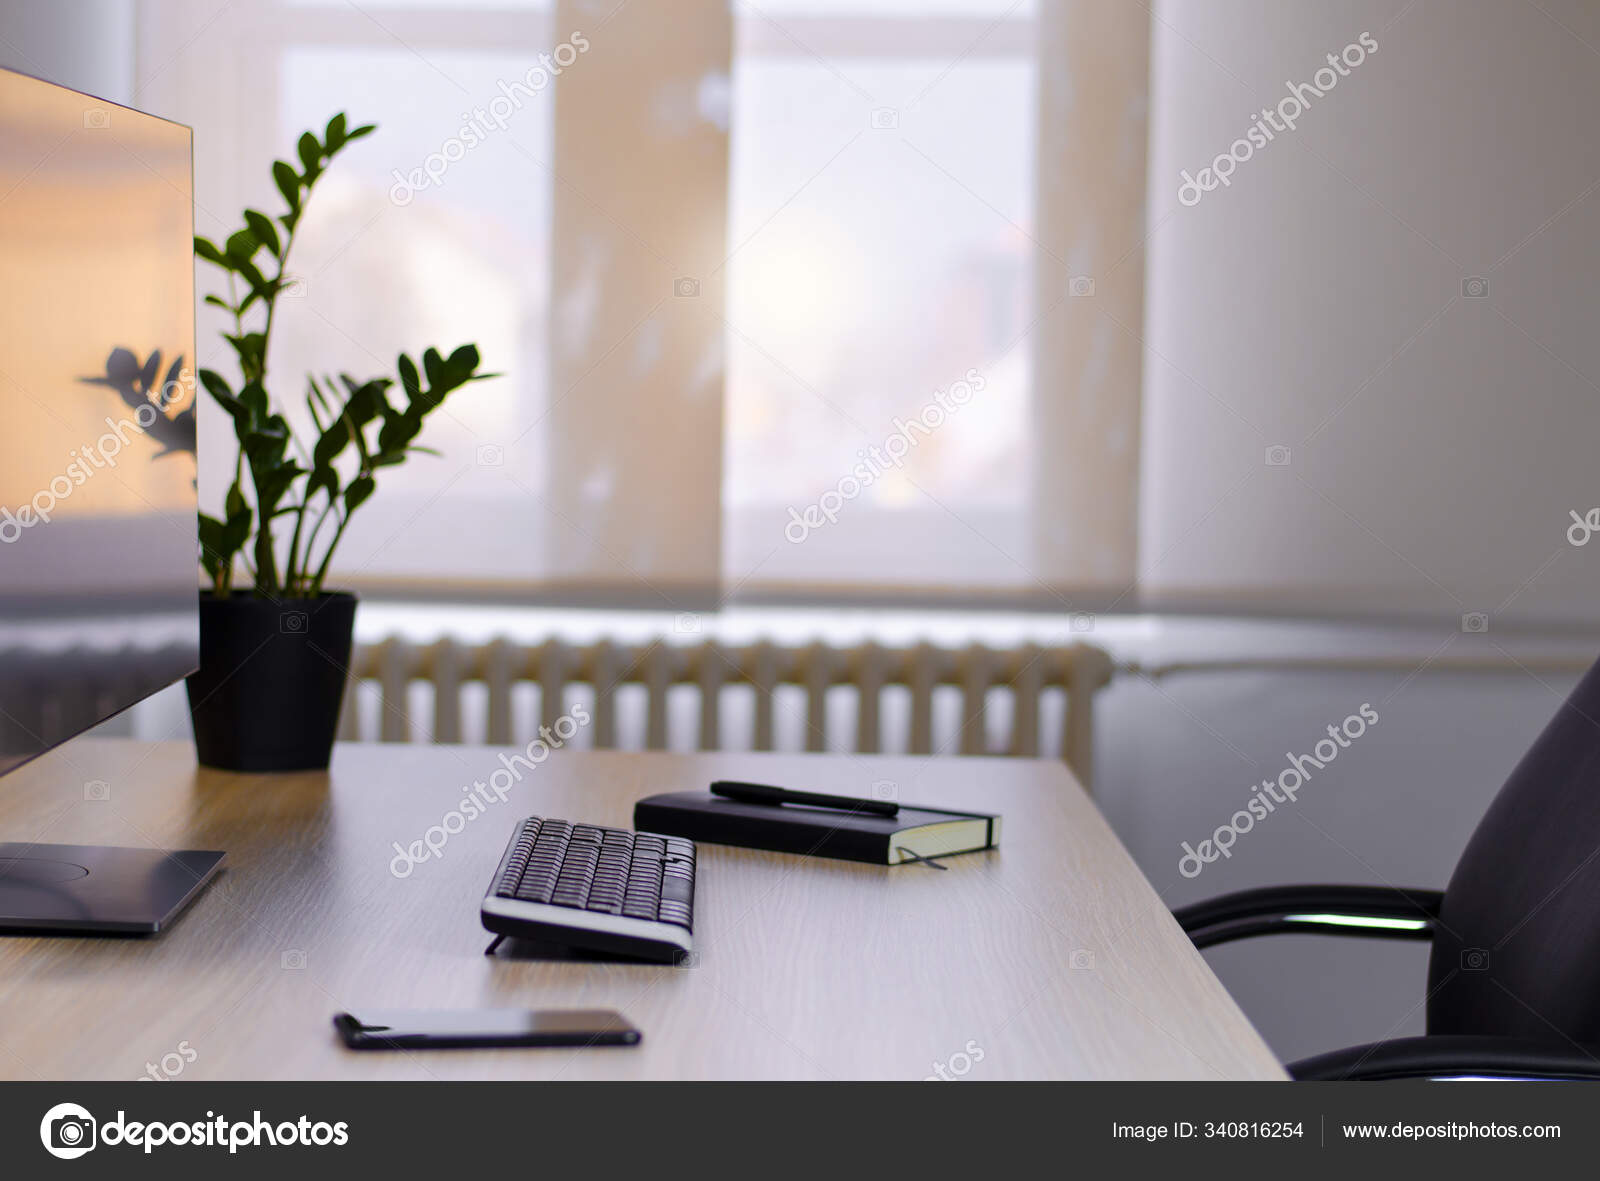 Nice And Neat Office Work Place By The Window Stock Photo